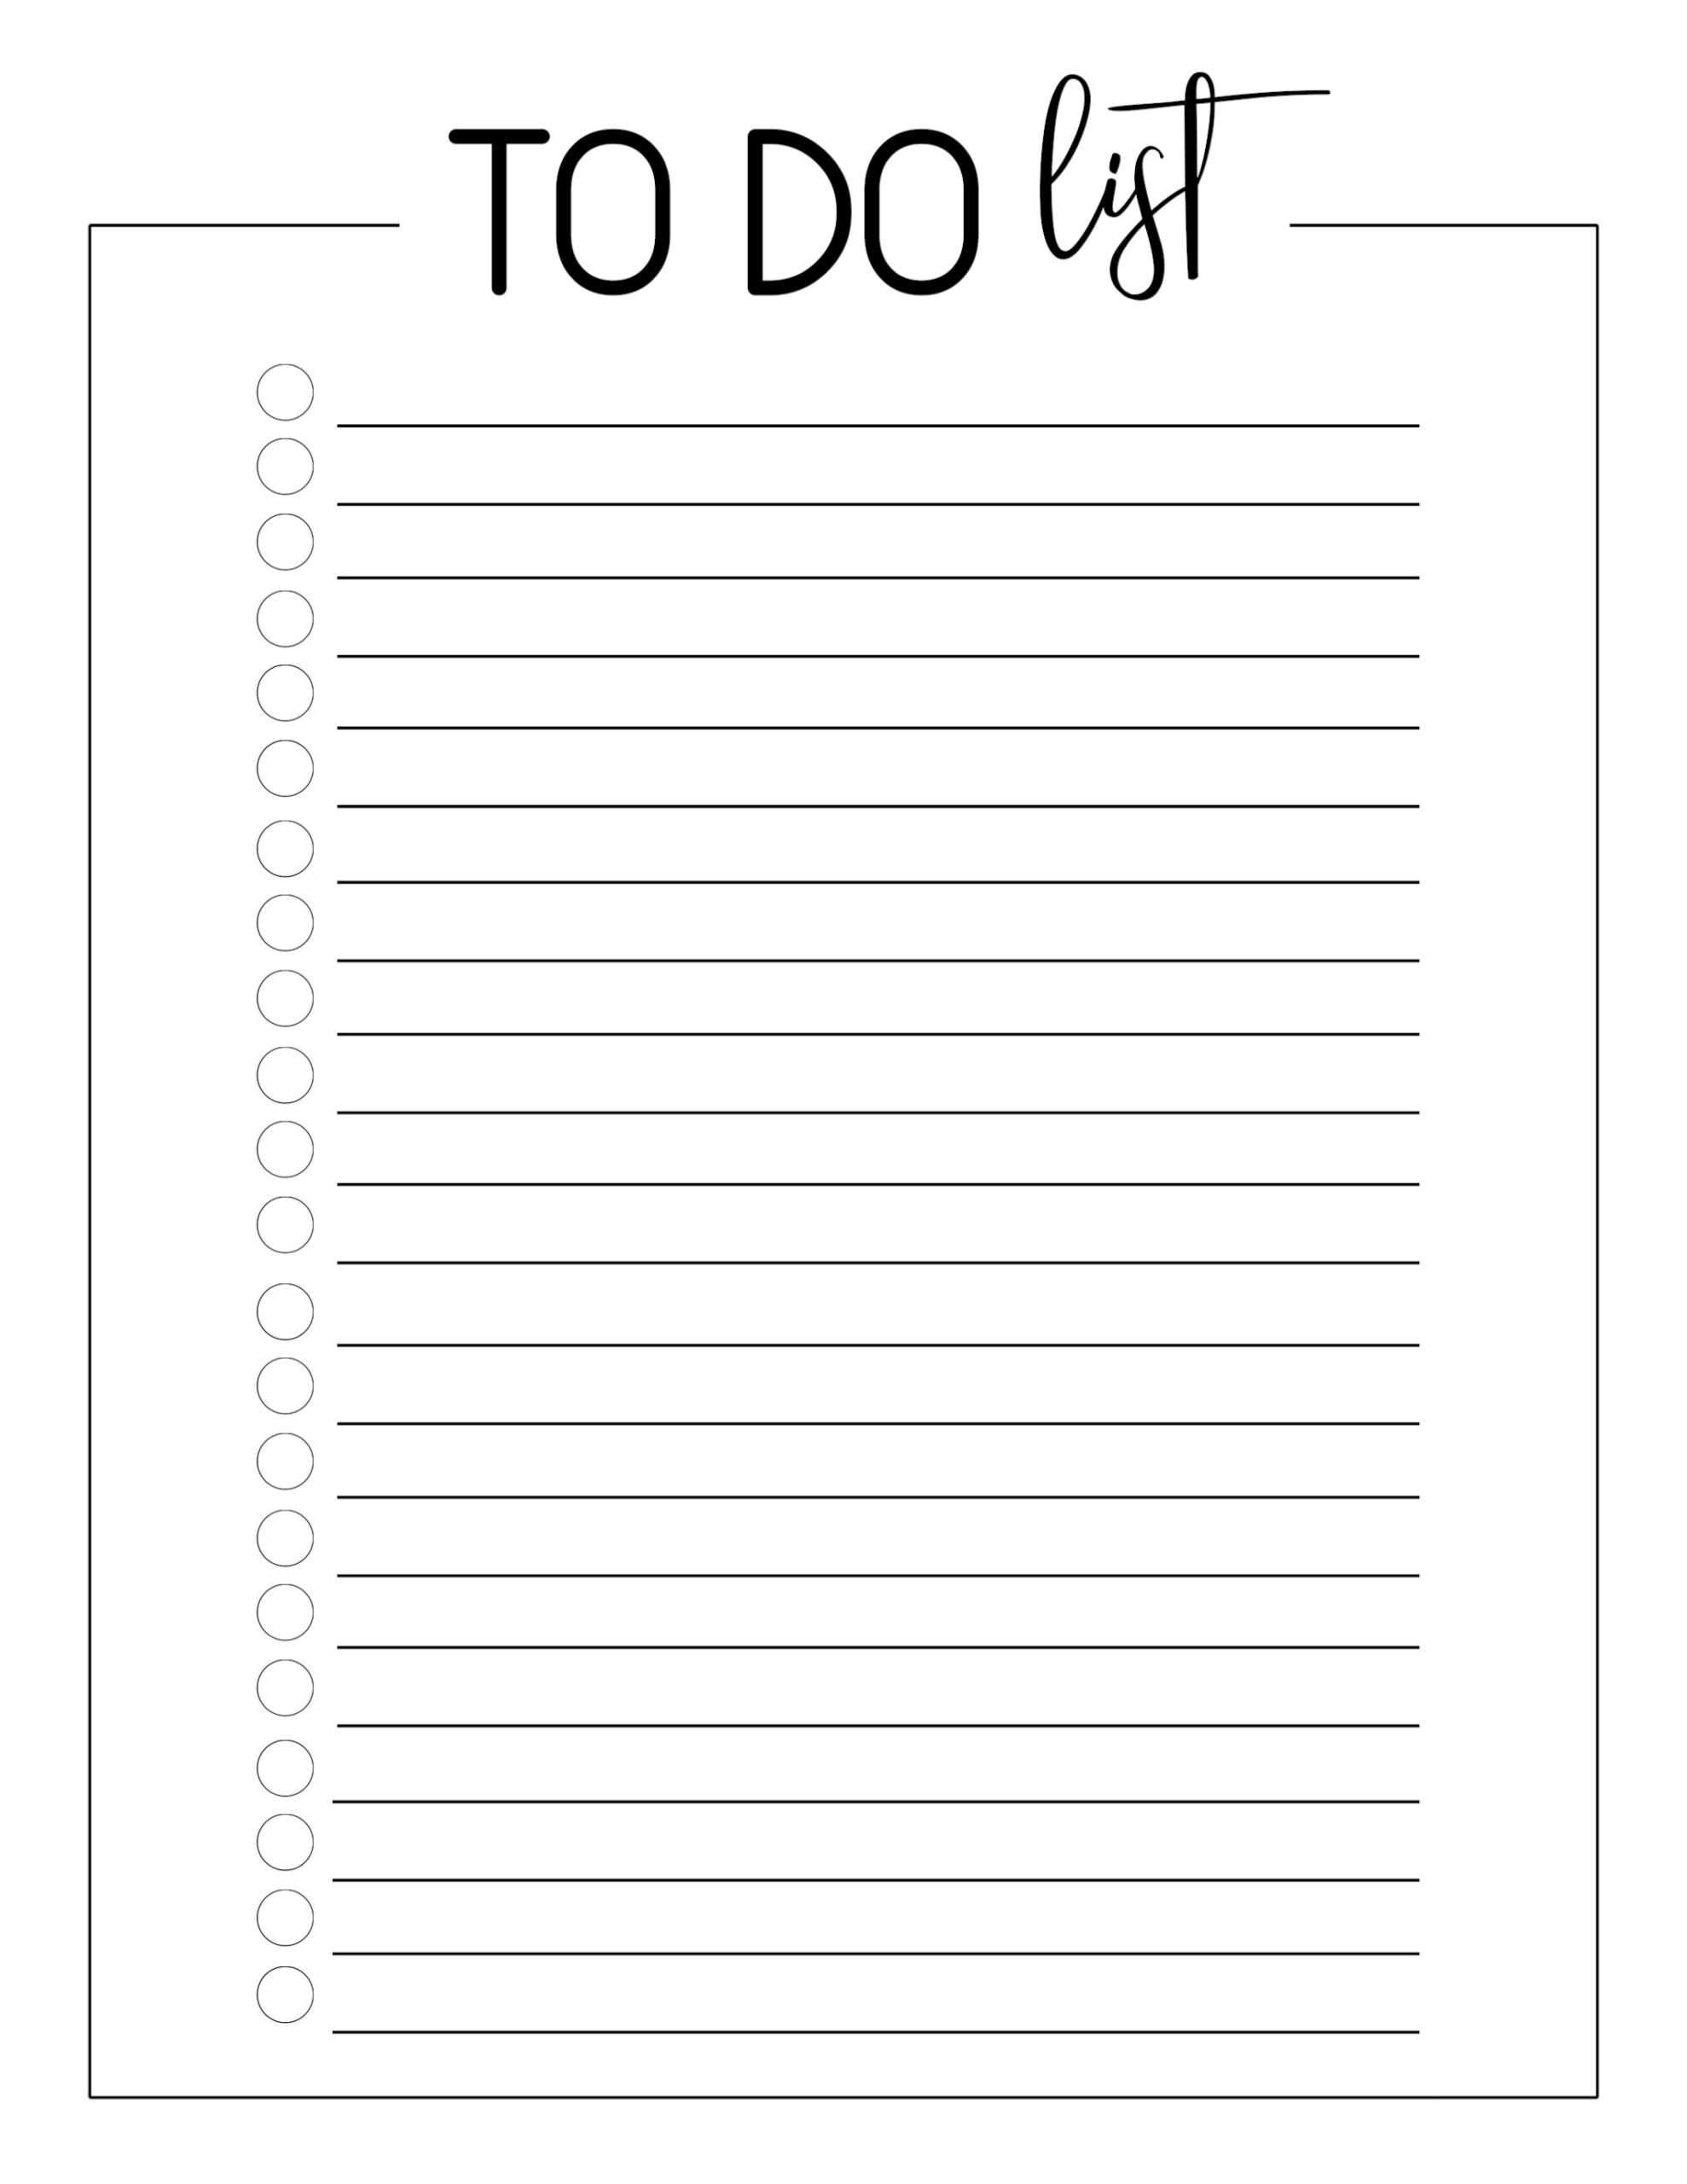 3Cf515 Blank Checklist Templates | Wiring Library In Blank To Do List Template